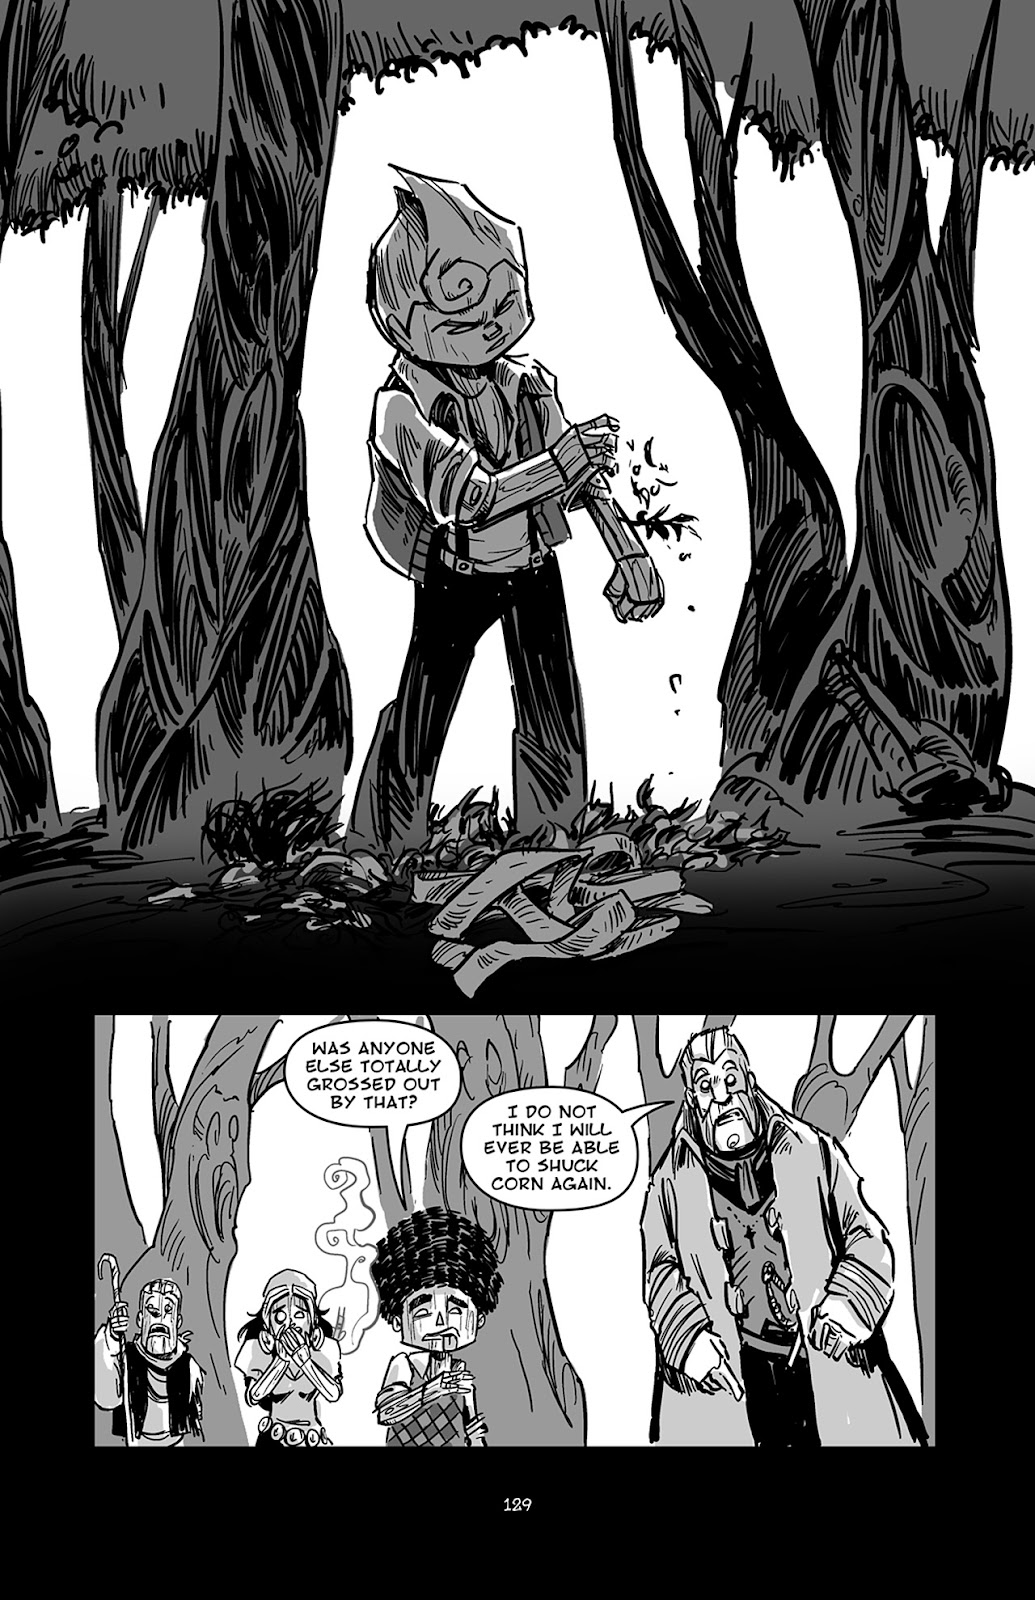 Pinocchio: Vampire Slayer - Of Wood and Blood issue 6 - Page 6